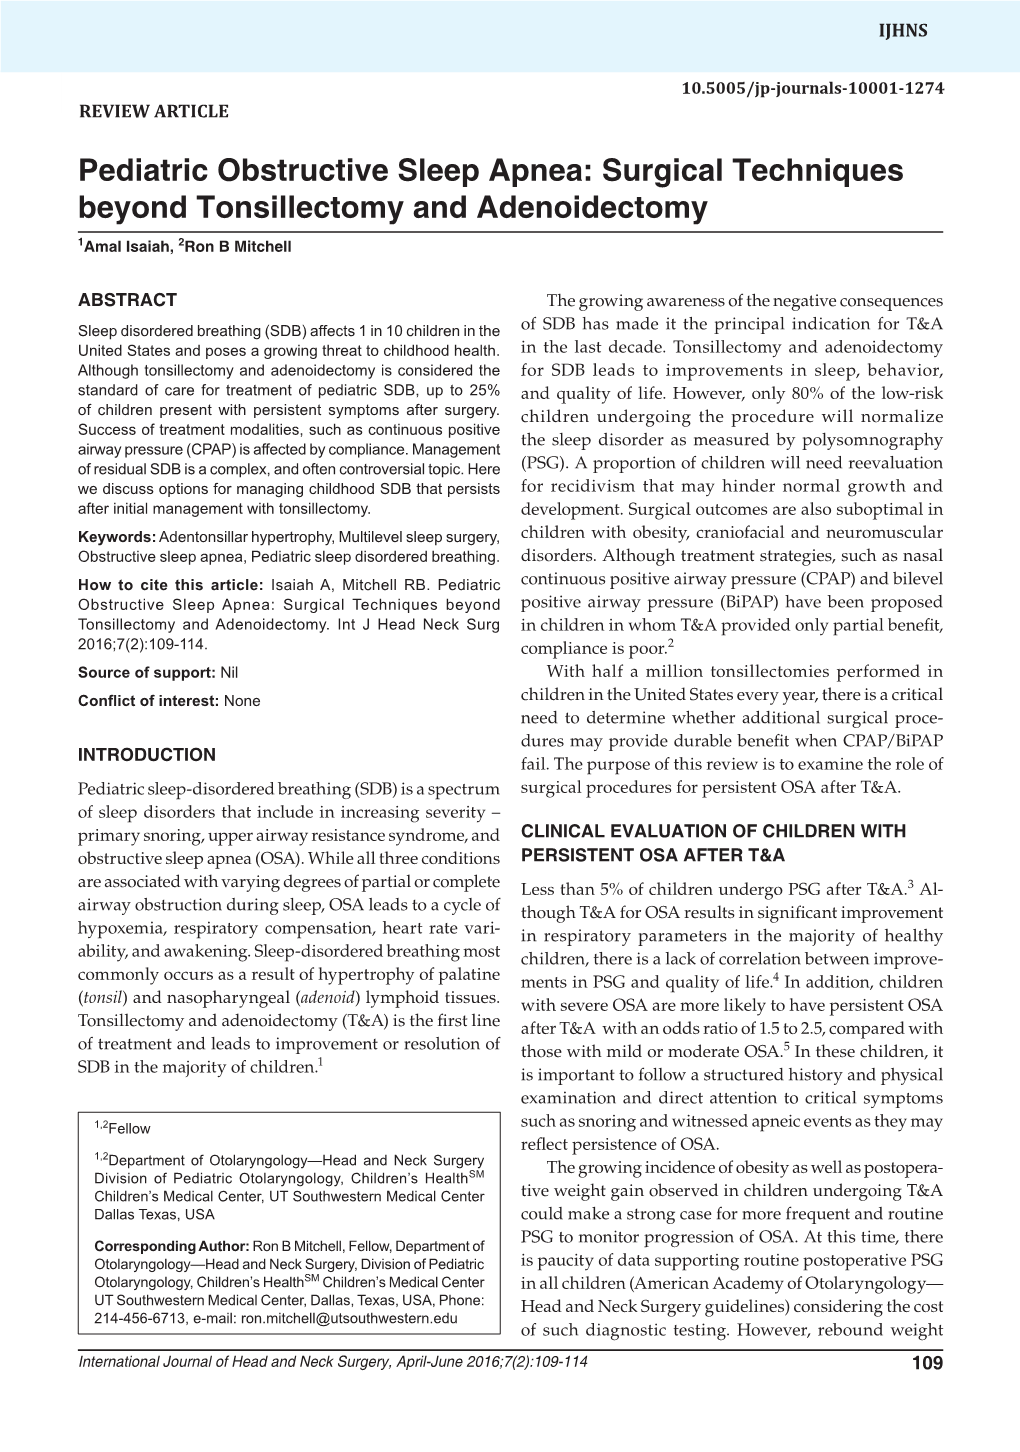 Pediatric Obstructive Sleep Apnea: Surgical Techniques Beyond10.5005/Jp-Journals-10001-1274 Tonsillectomy and Adenoidectomy Review Article